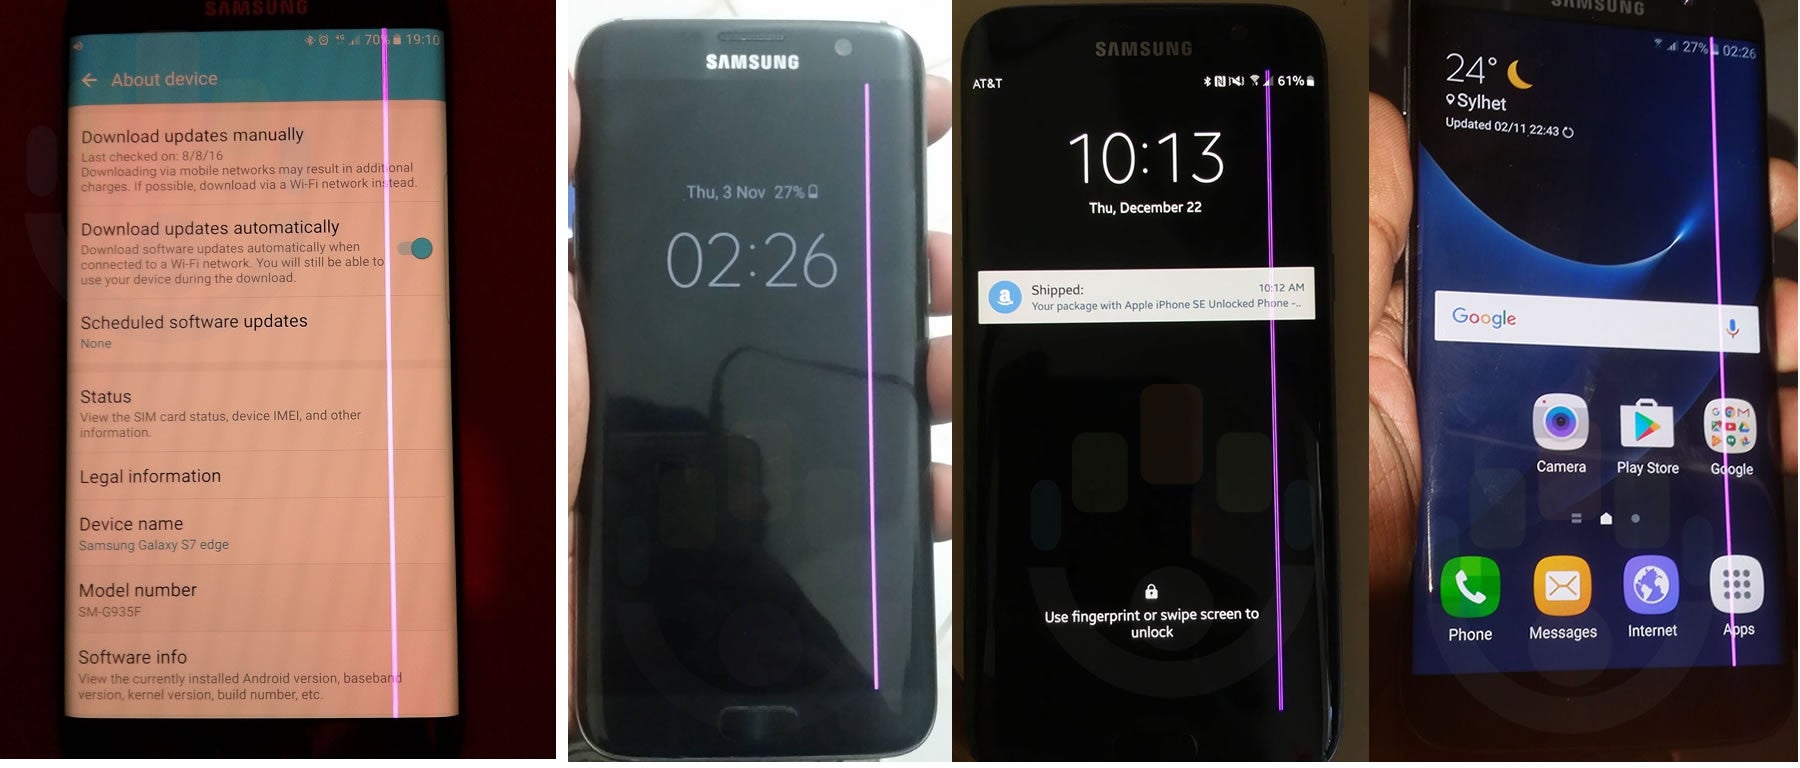 Samsung Galaxy S7 edge units affected by the pink line of death issue - Samsung Galaxy S7 edge display failing for many due to pink line of death issue